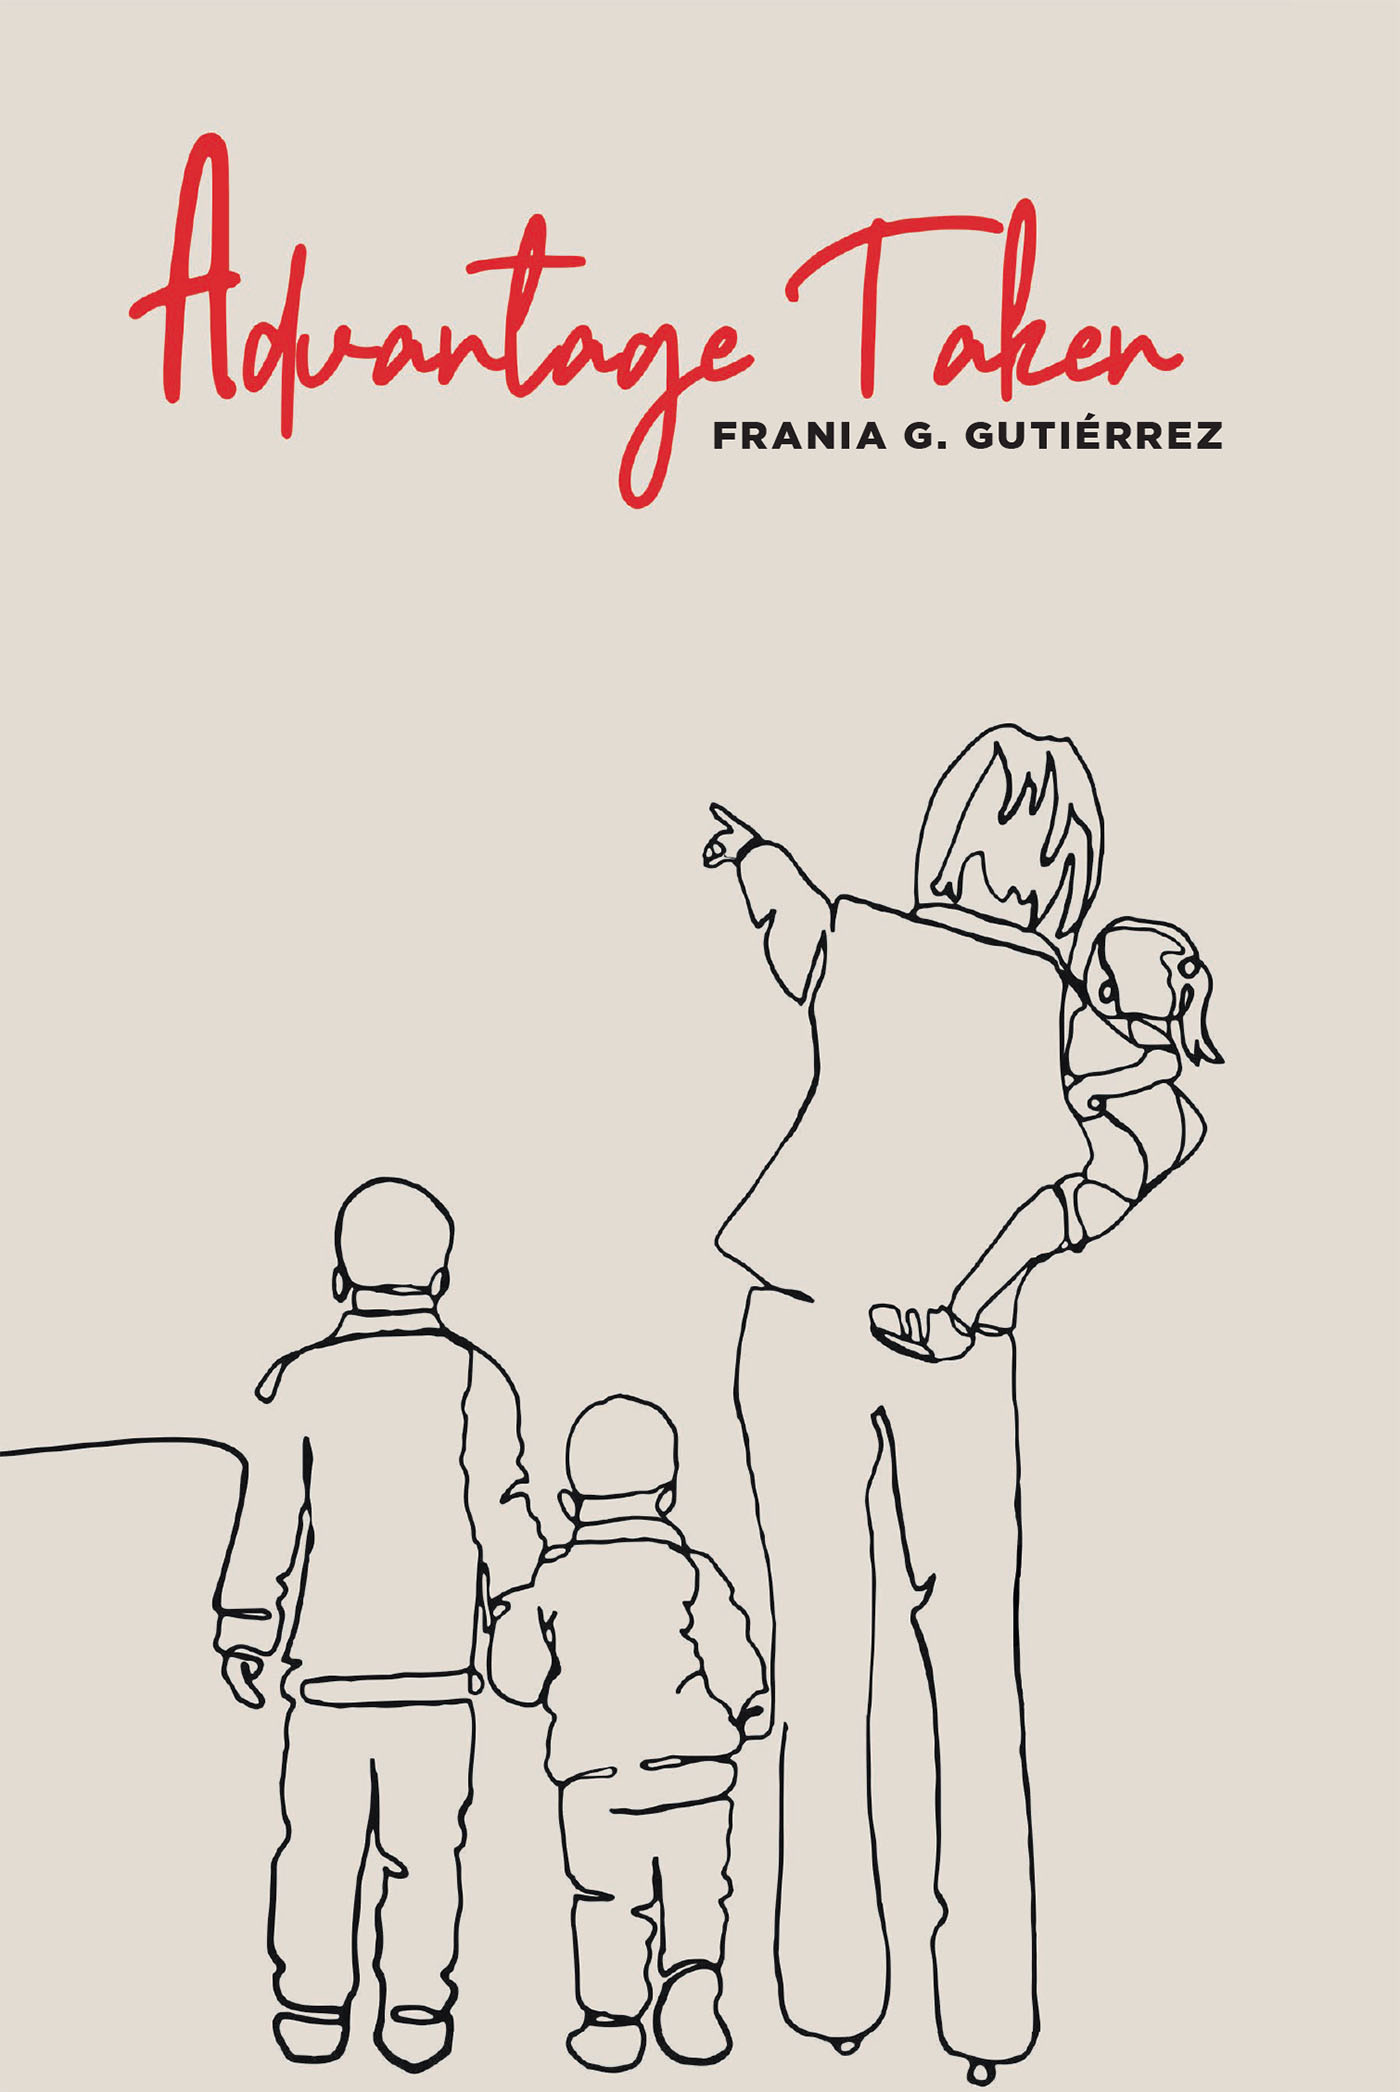 Author Frania G. Gutiérrez’s New Book "Advantage Taken" Tells the True Account of How the Author Found the Courage to Take Her First Step Into a Future of Her Own Design